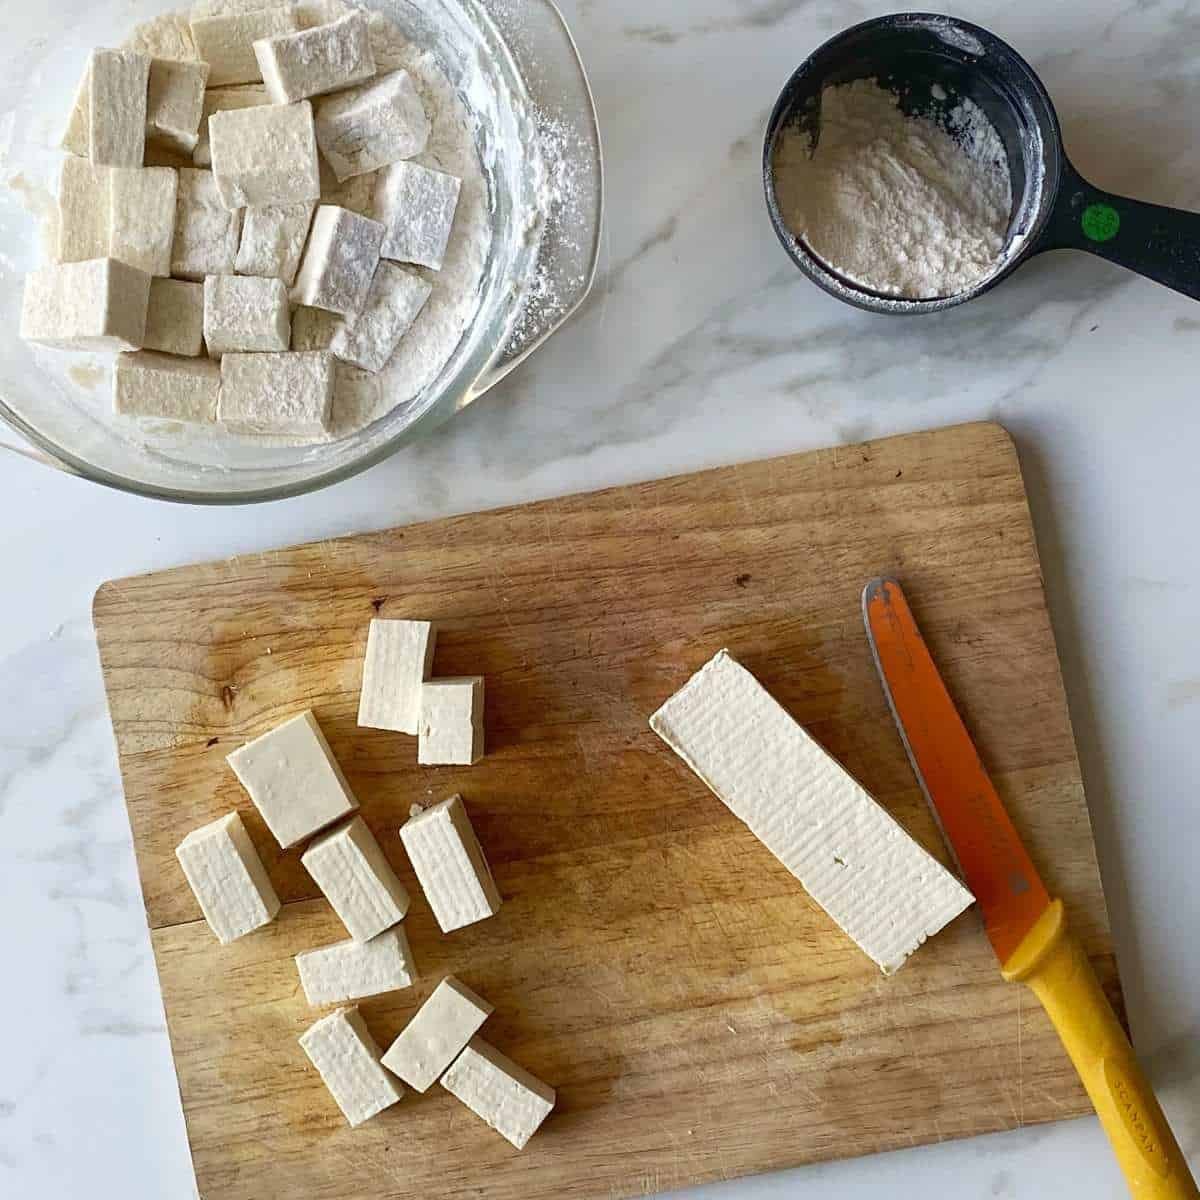 Cubed tofu being tossed through flour to help gently fry and crisp in a medium frypan.